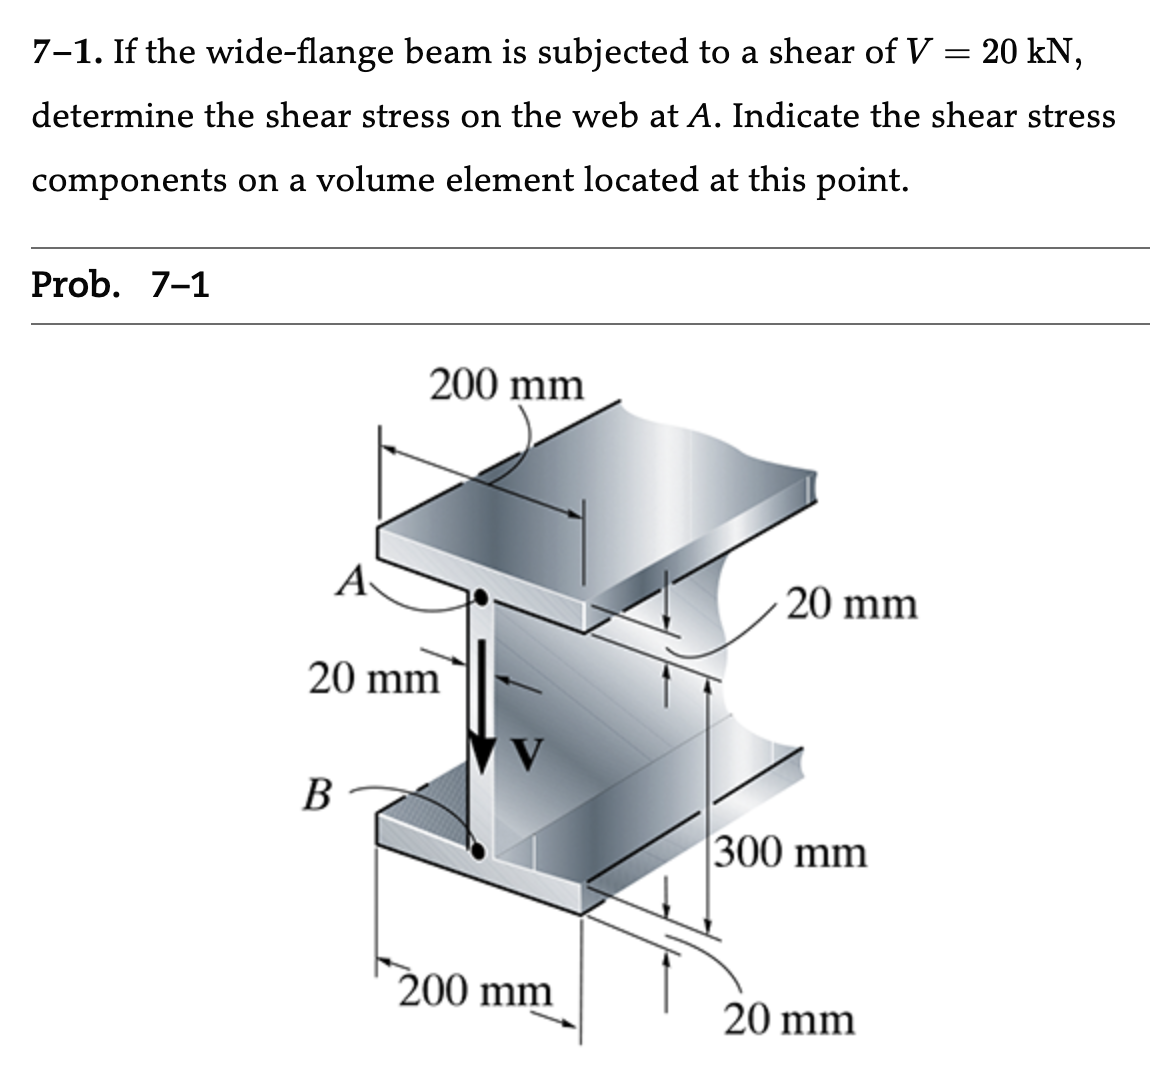 7-1. If the wide-flange beam is subjected to a shear of V = 20 kN,
determine the shear stress on the web at A. Indicate the shear stress
components on a volume element located at this point.
Prob. 7-1
200 mm
A
20 mm
B
20 mm
300 mm
200 mm
20 mm